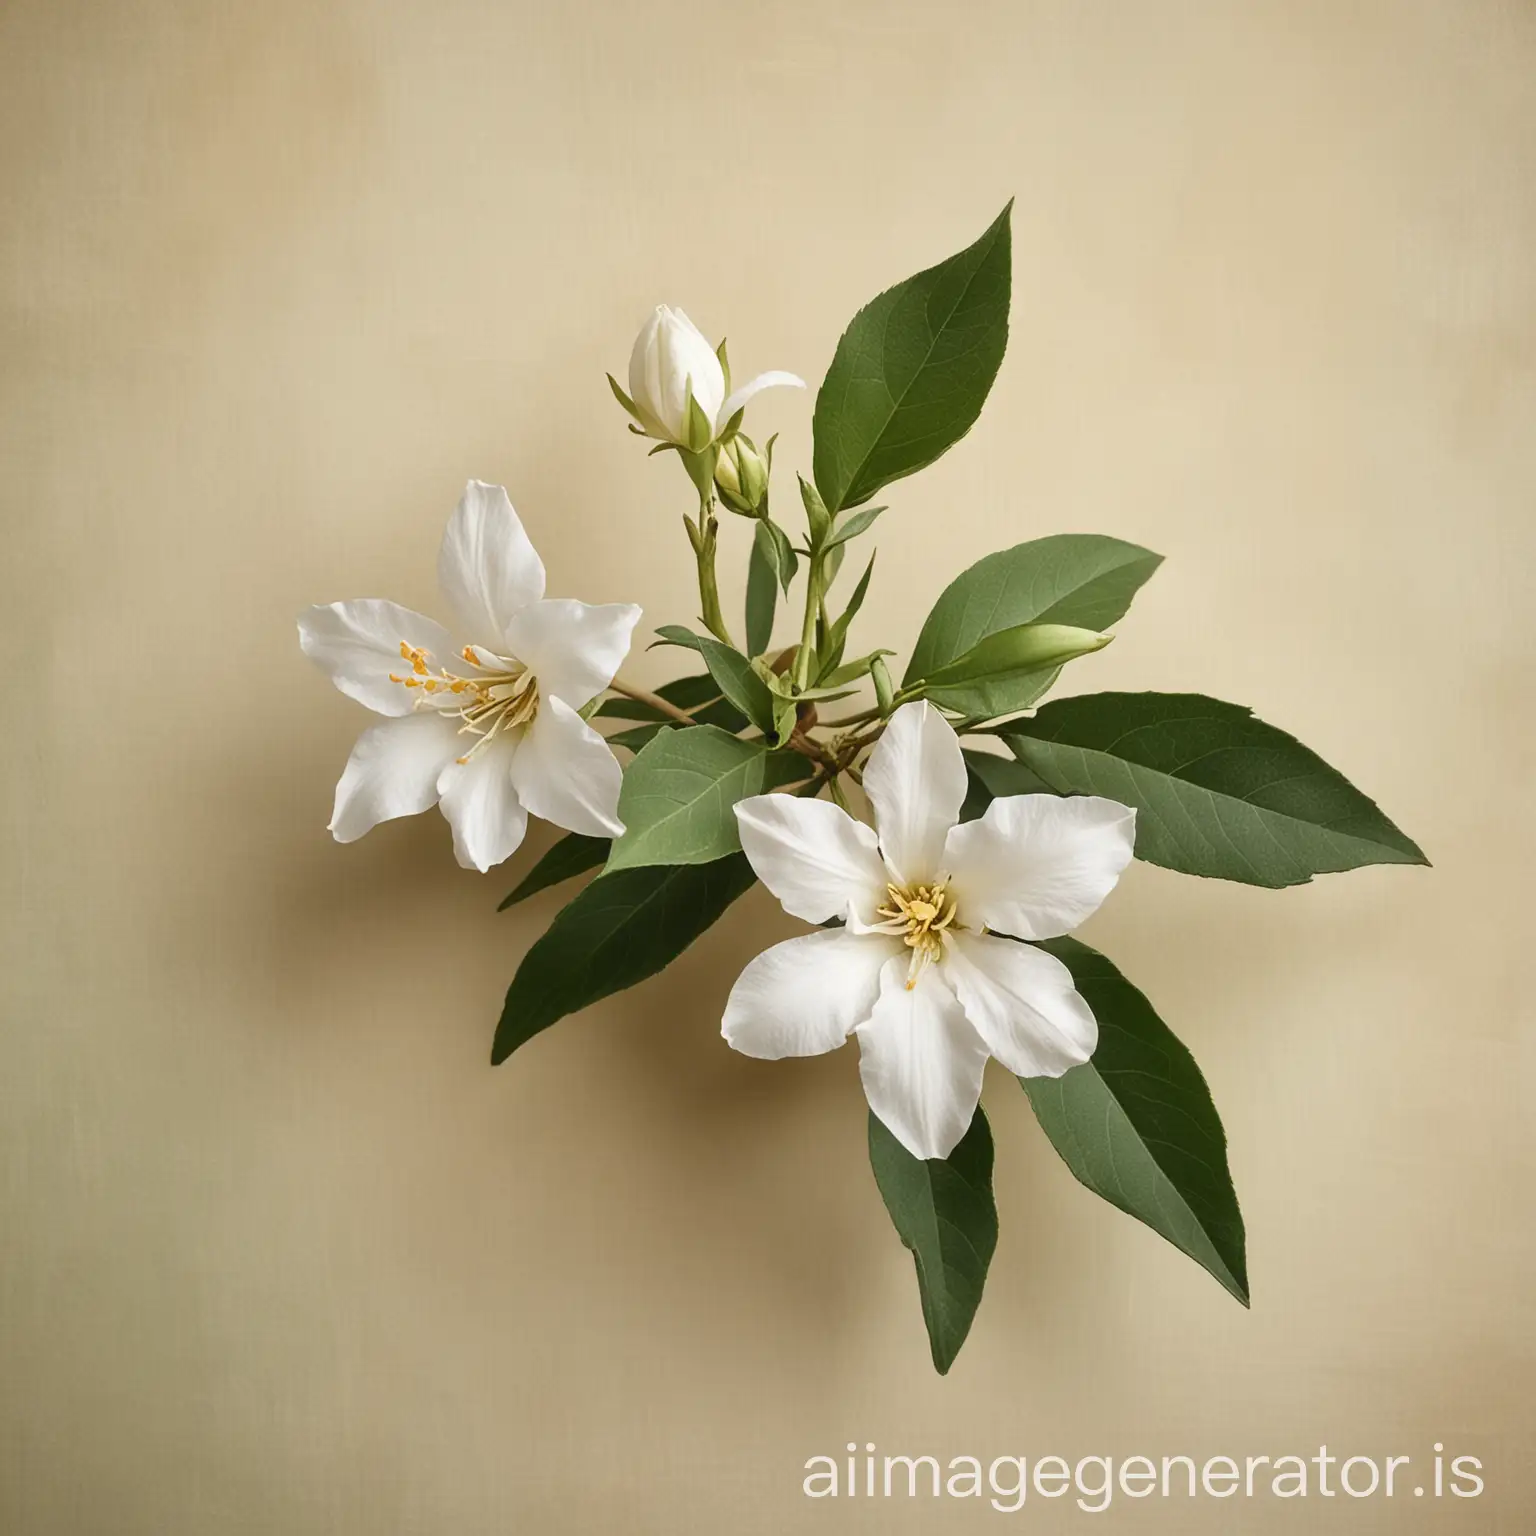 a delicate jasmine flower on a tropical beige and sage background